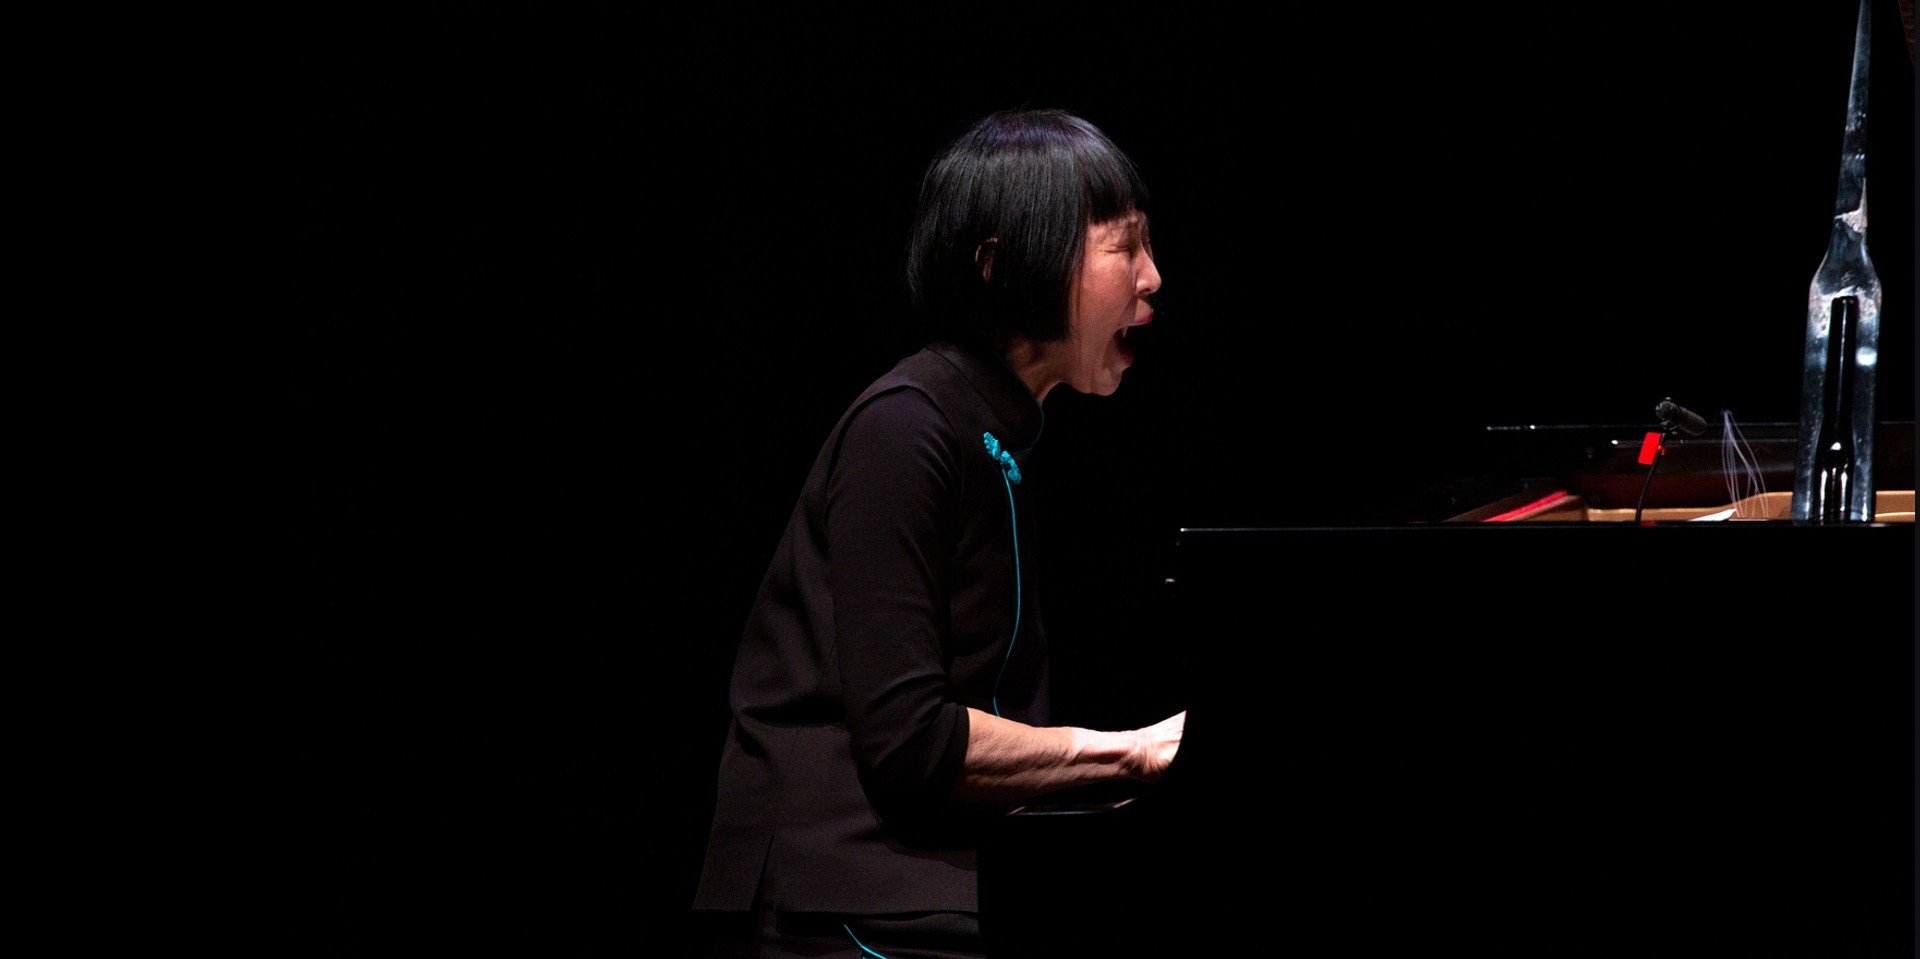 “You can make music on just about any object capable of producing sound”: An interview with toy piano virtuoso, Margaret Leng Tan